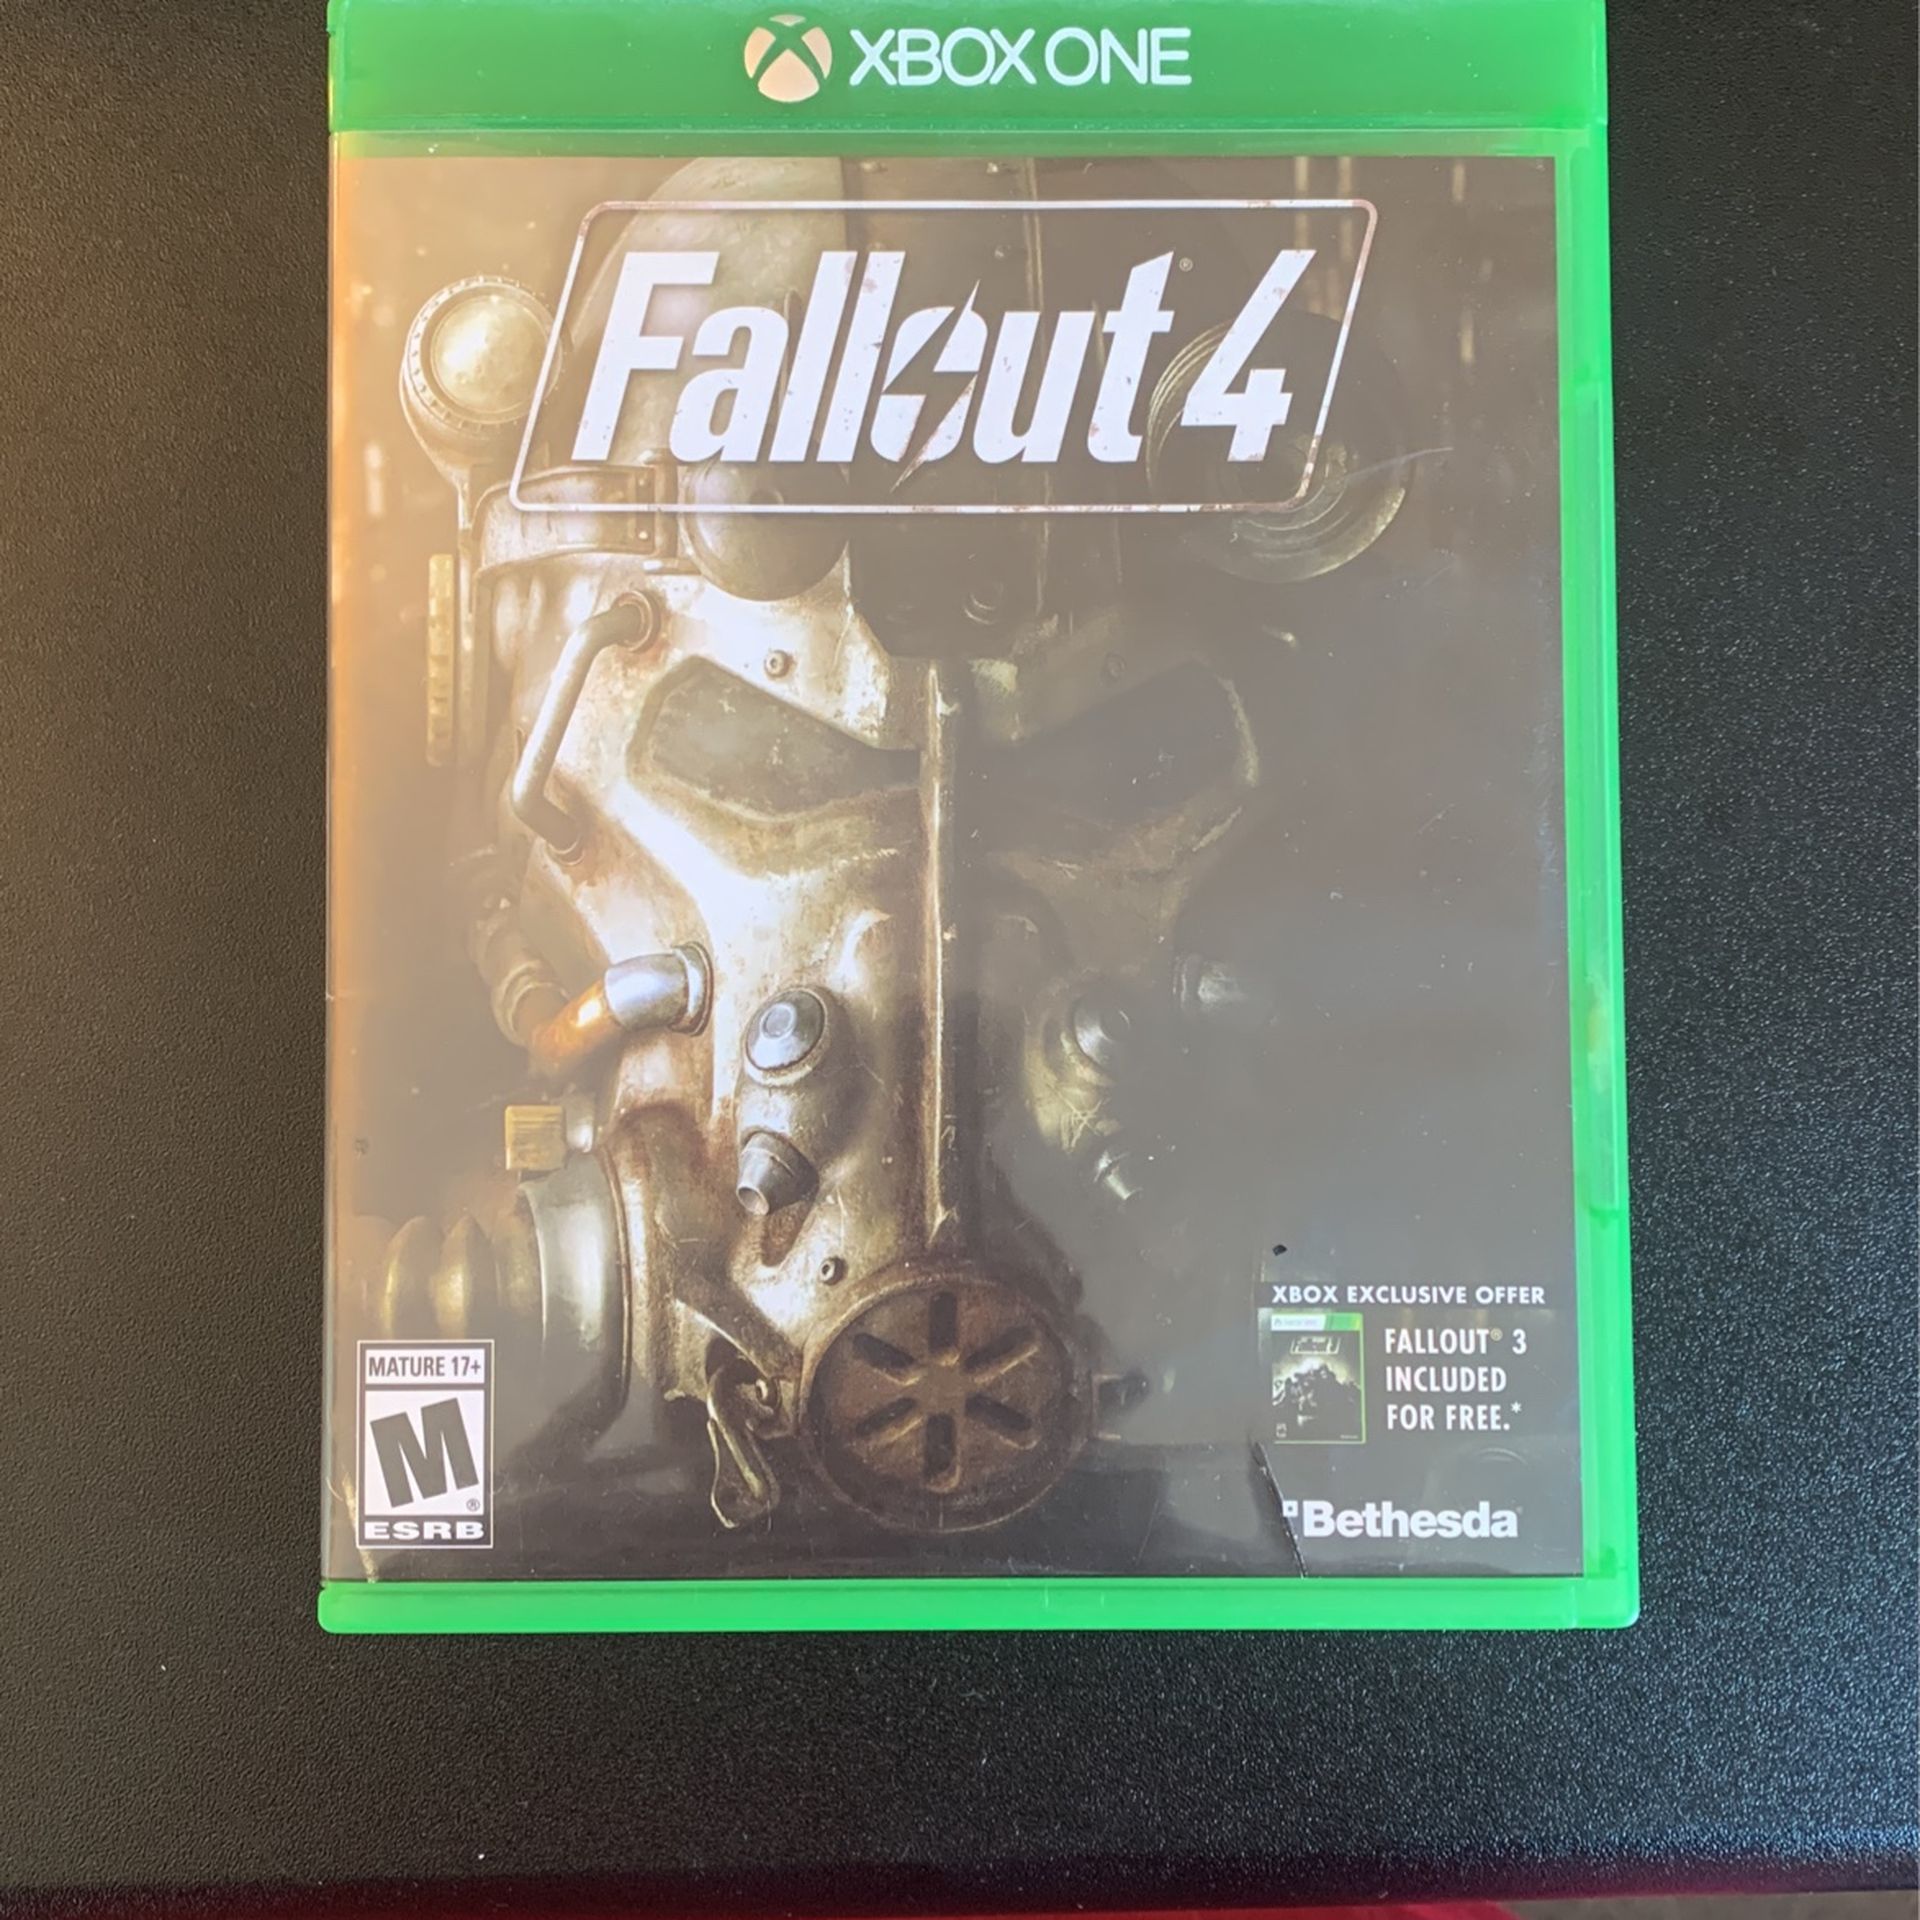 FALLOUT 4 - XBOX ONE